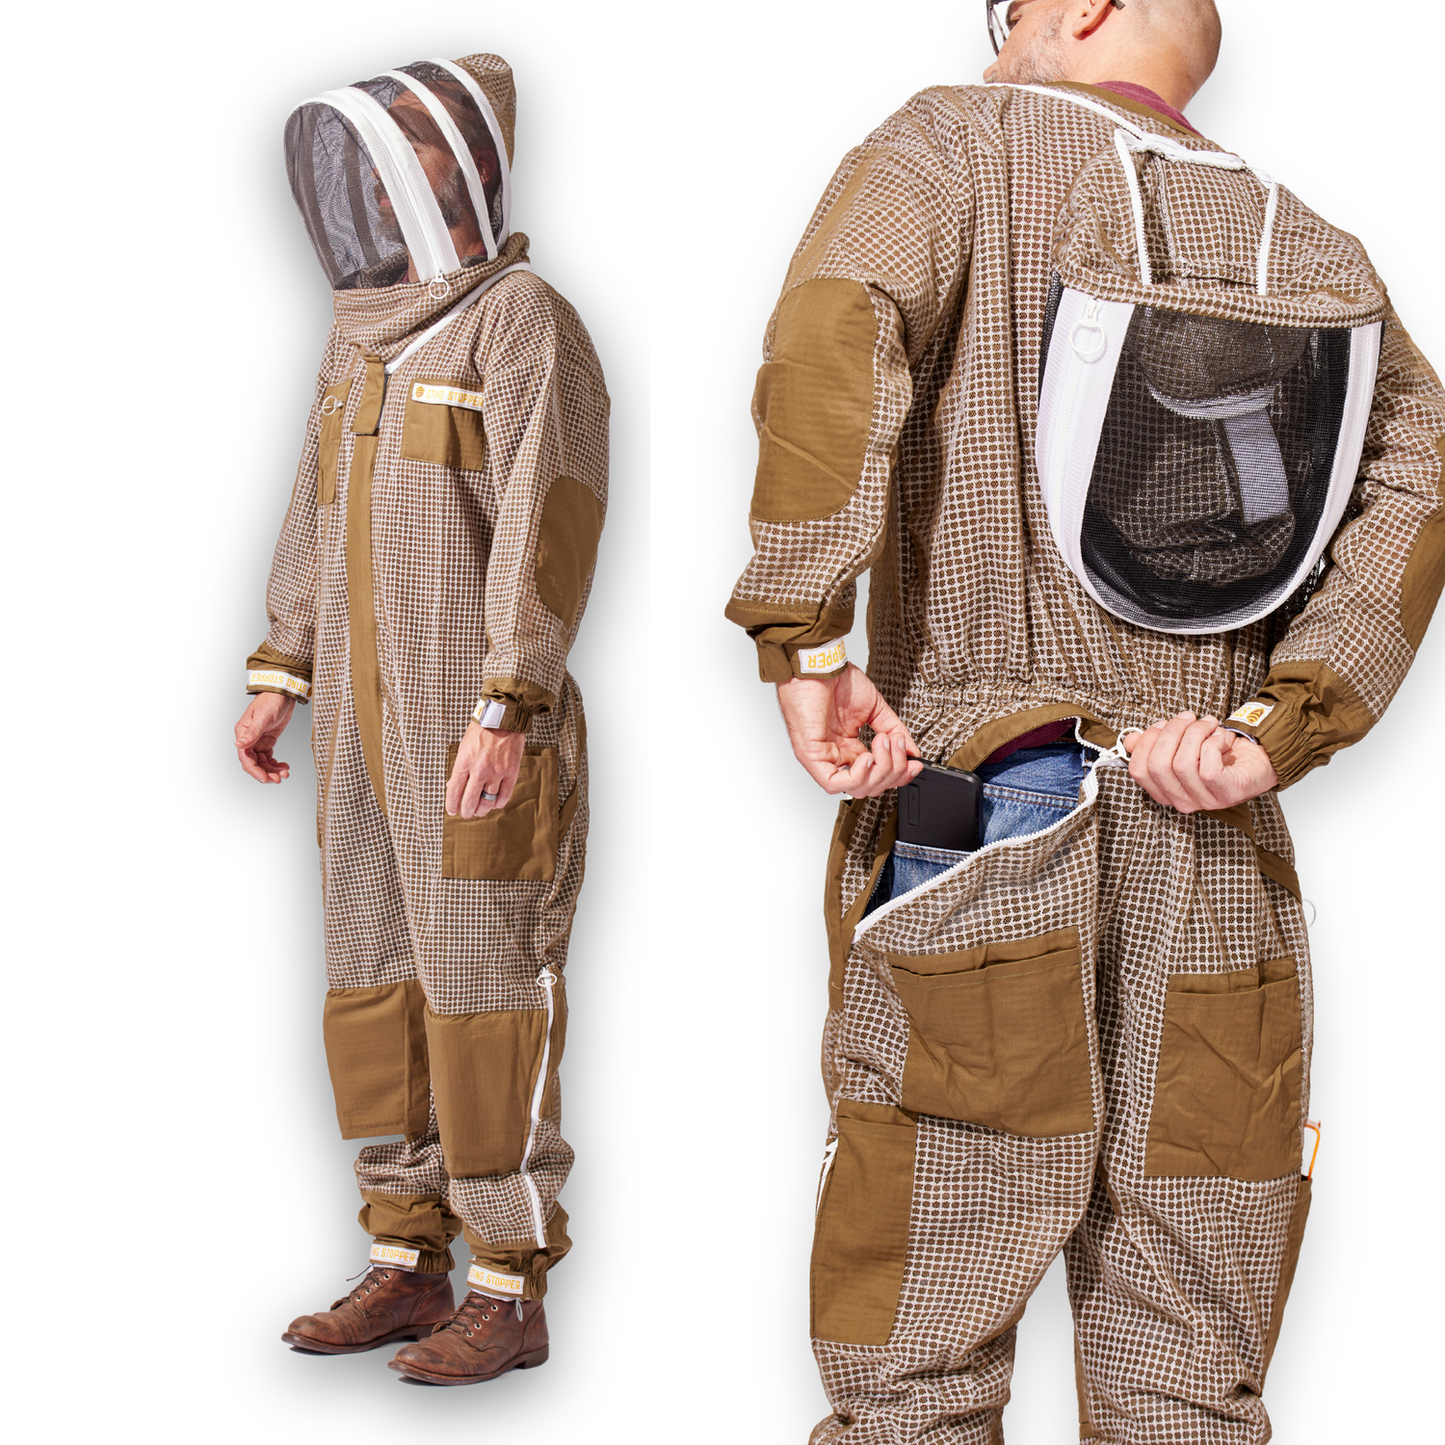 Professional Triple Layer Ventilated Full Beekeeping Suit